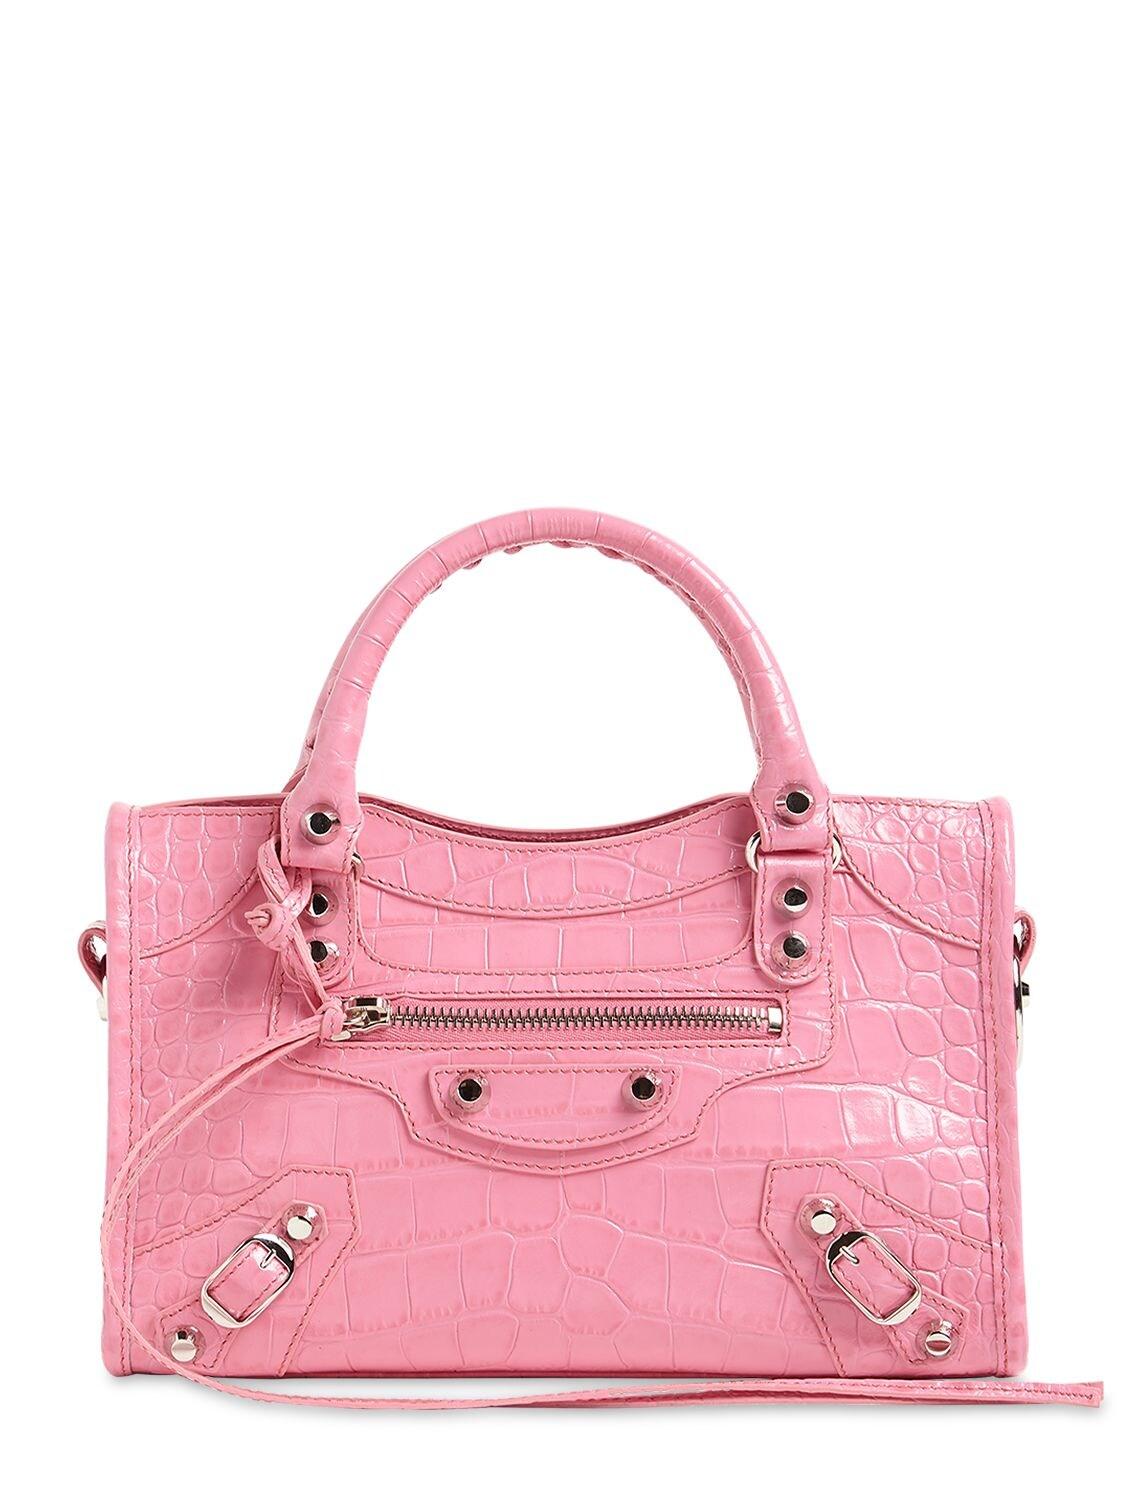 Balenciaga Mini City Croc Embossed Leather Bag in Pink - Lyst